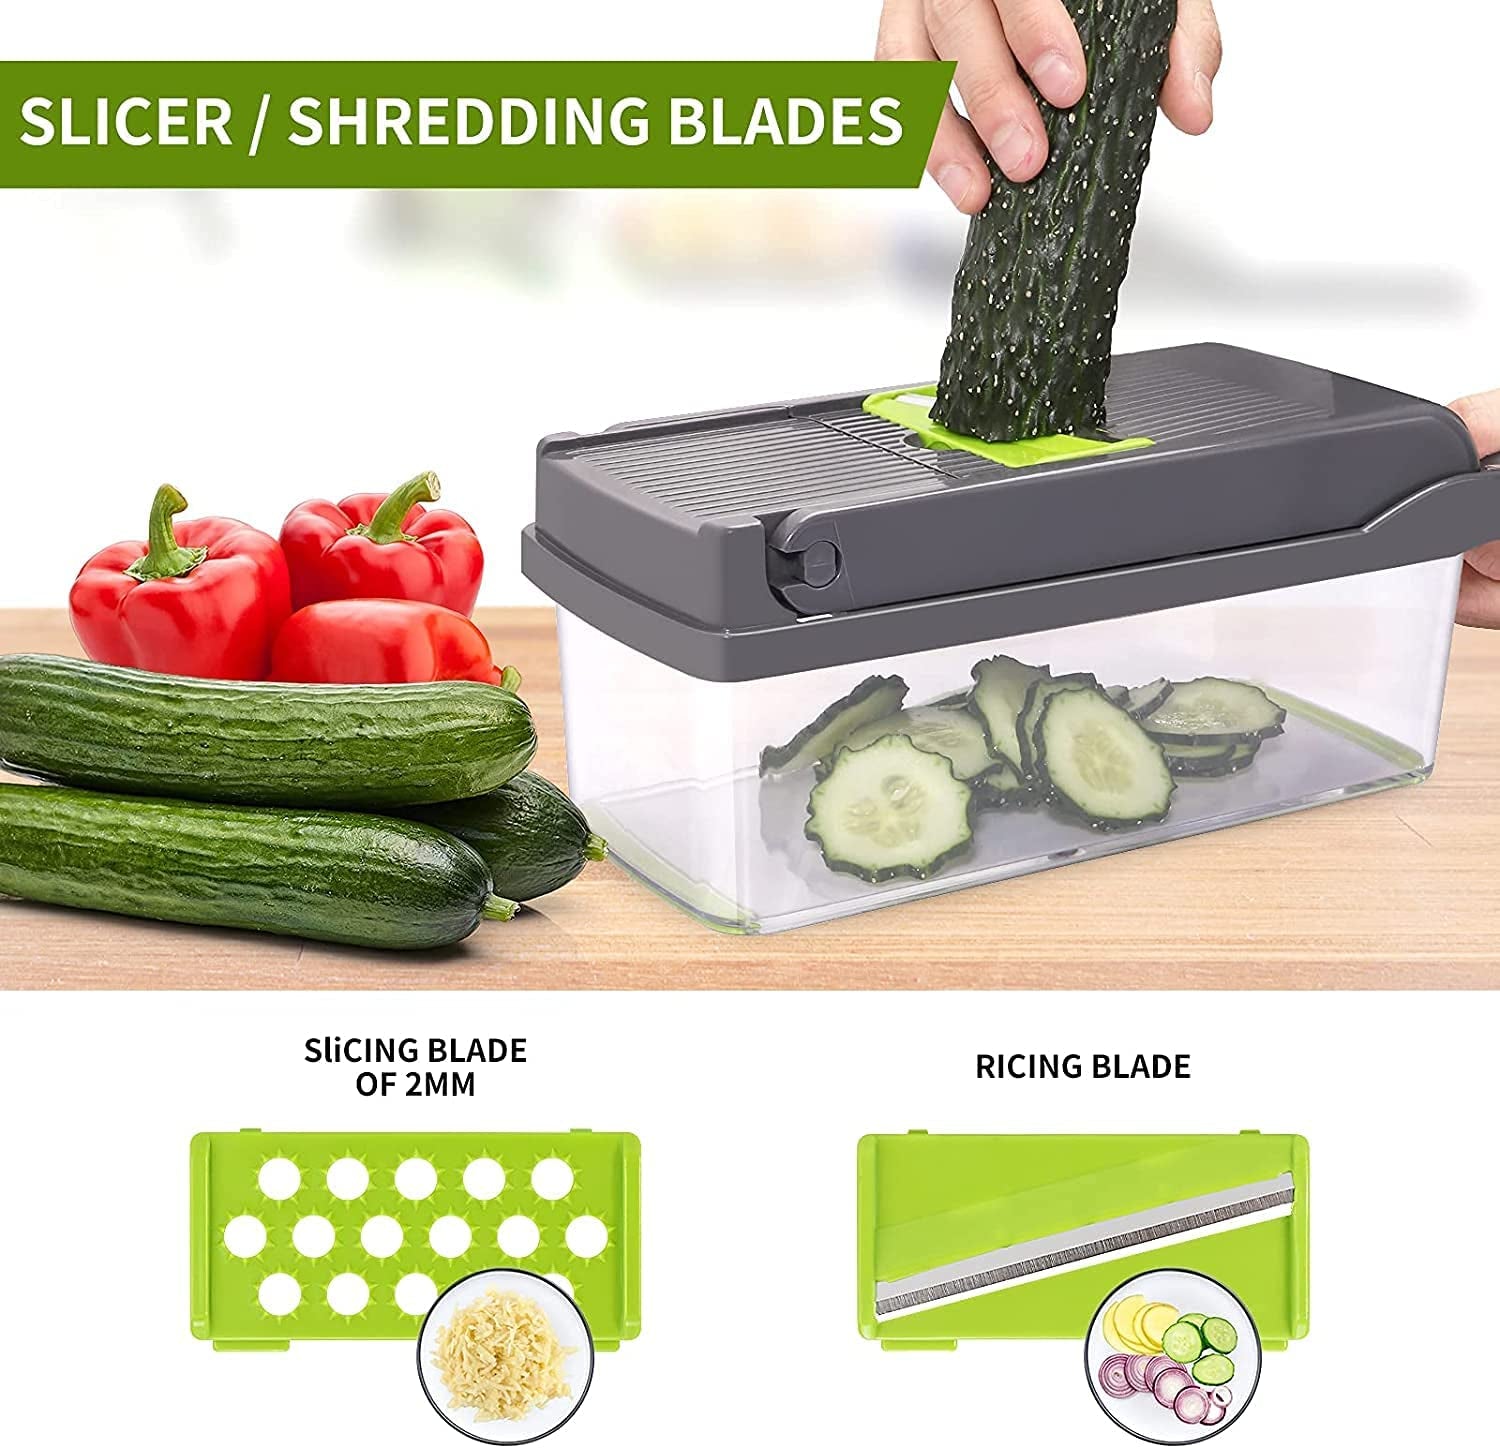 Versatile 13-In-1 Vegetable & Fruit Chopper with 8 Interchangeable Blades - Including Onion Chopper, Mandolin Slicer, and Cutter for Veggies - Complete with Colander Container - Essential Kitchen Tool for Preparing Salad, Potato, Carrot, Garlic